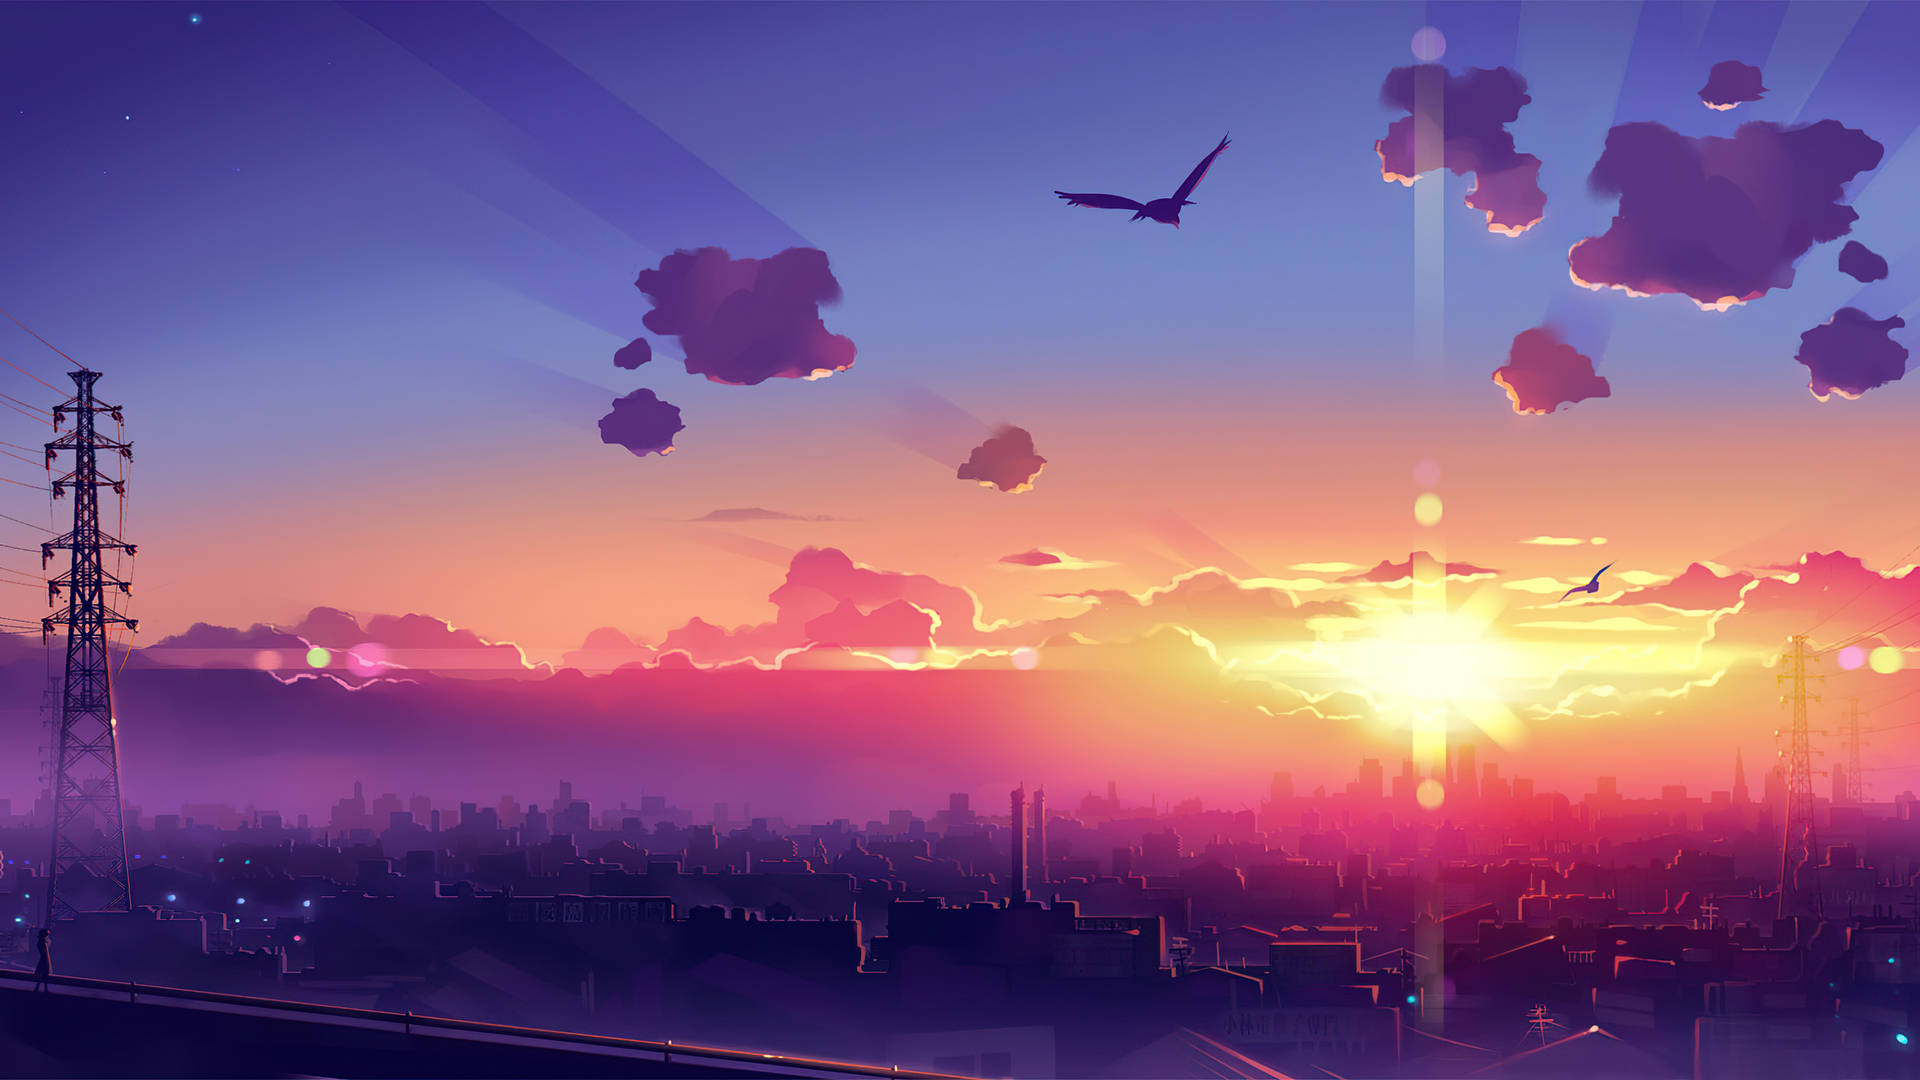 Immerse yourself in an anime-inspired vibrant utopian landscape. Wallpaper